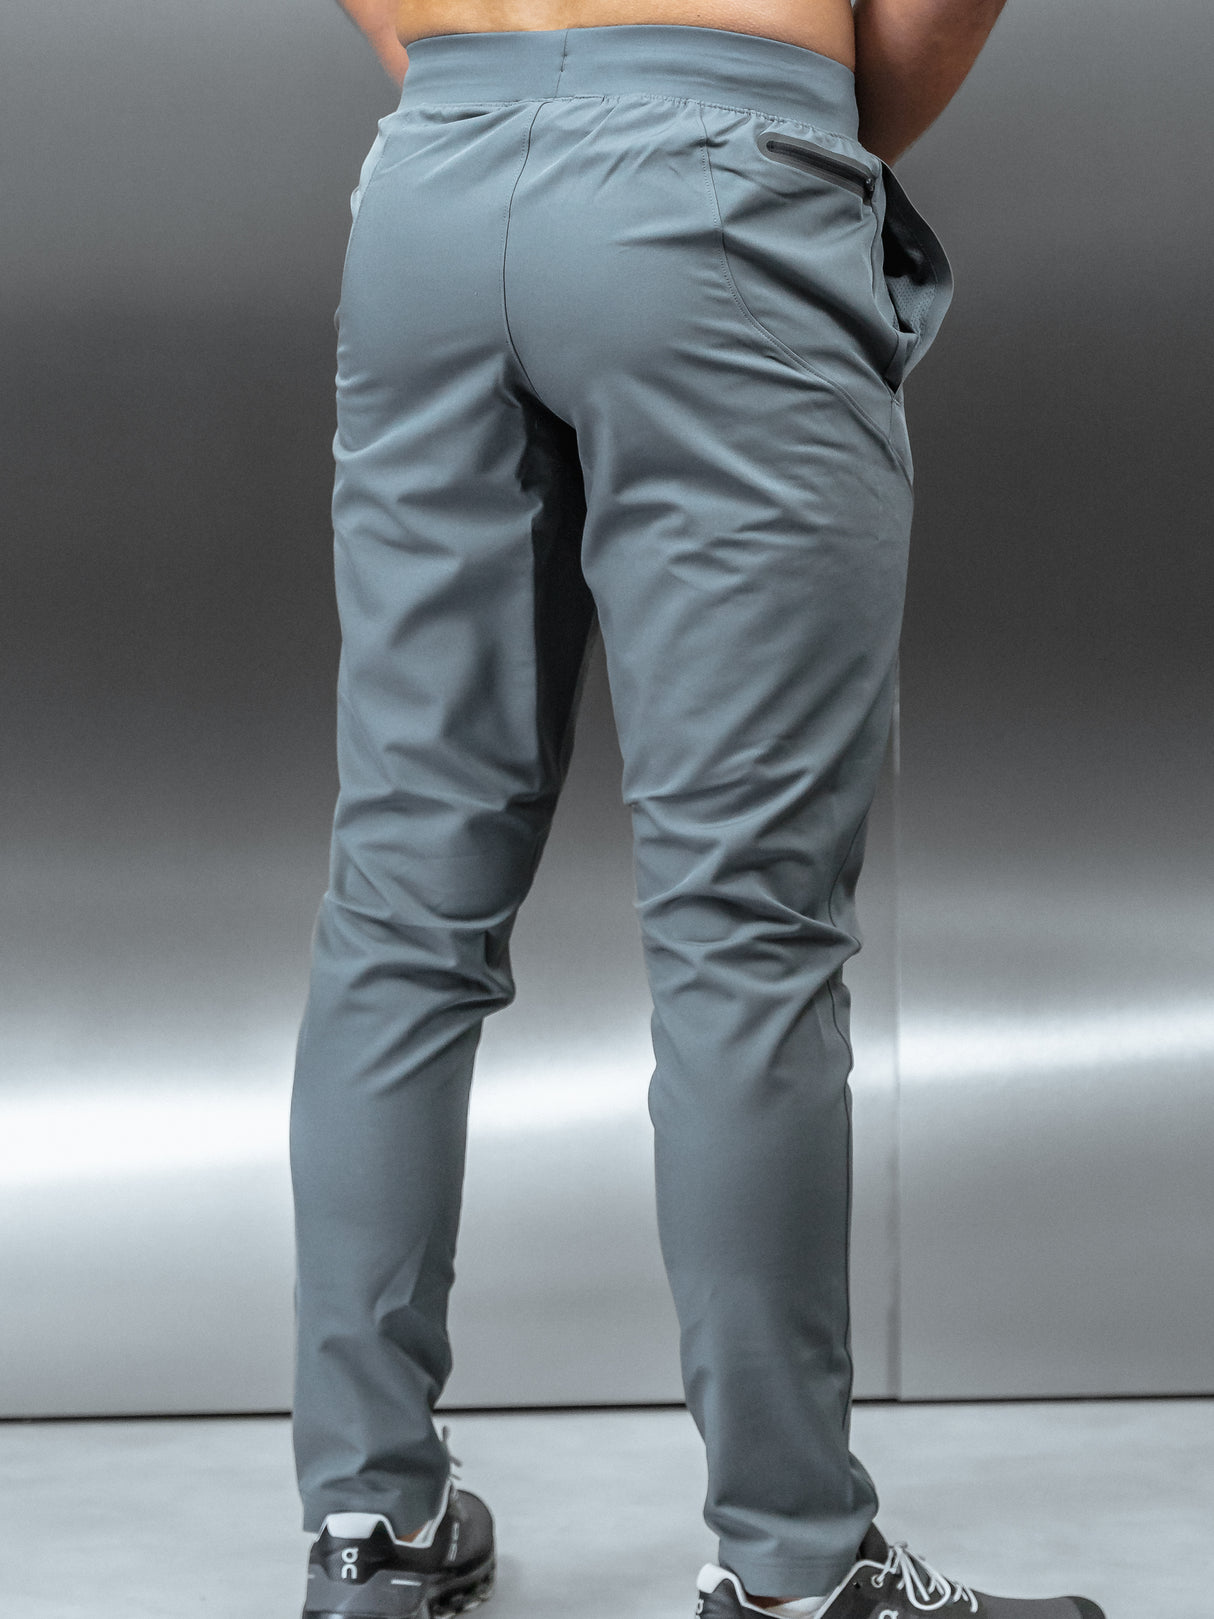 Under Armour - Unstoppable Pants - Grey